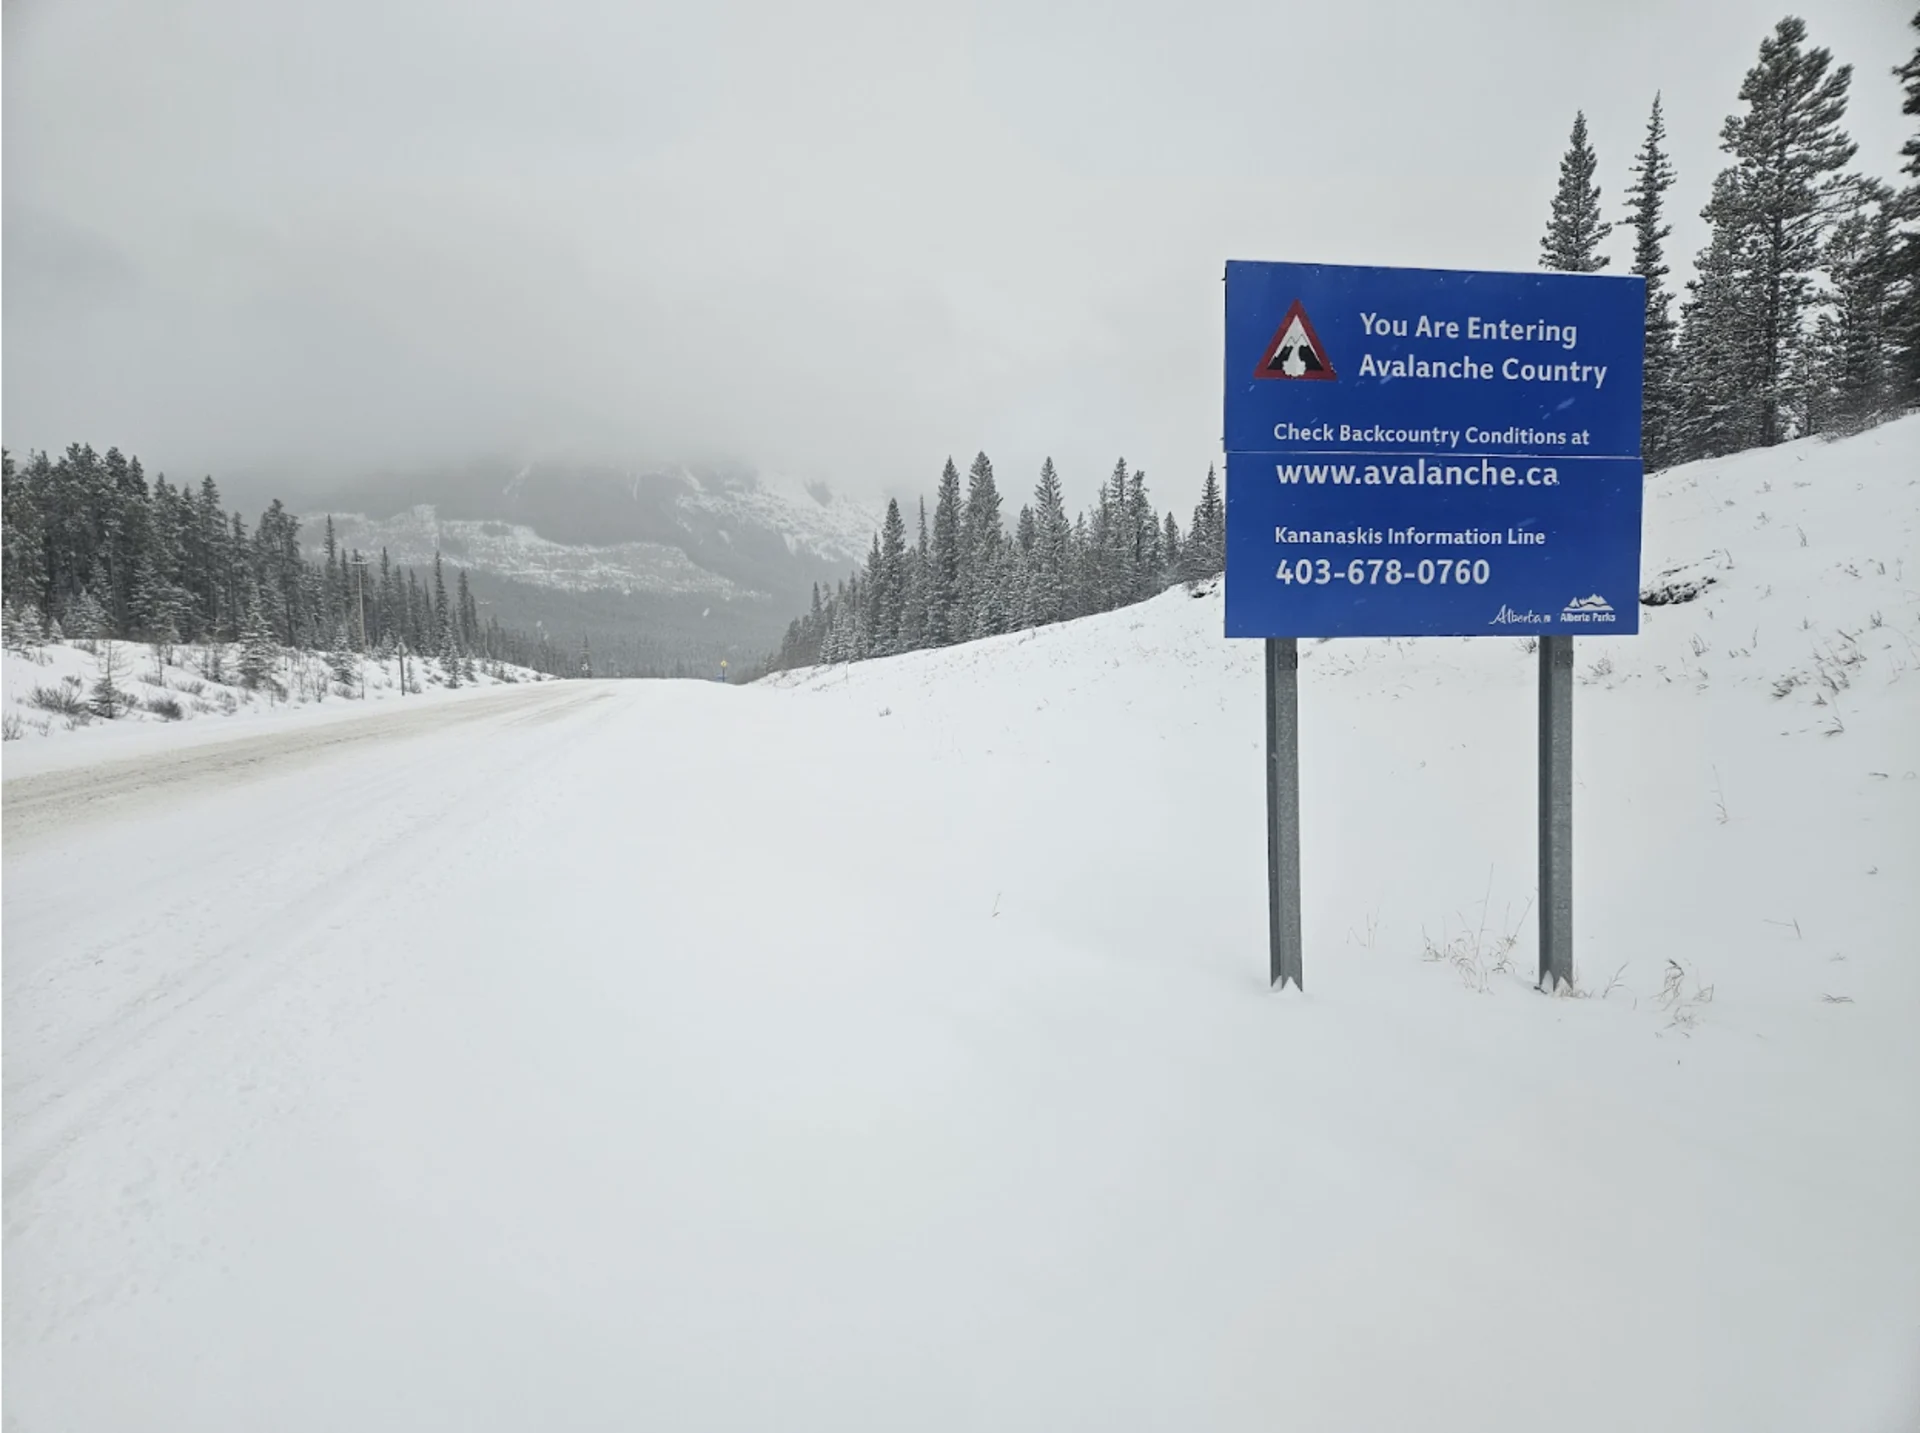 Avalanche warning issued as snow piles up in the Rockies